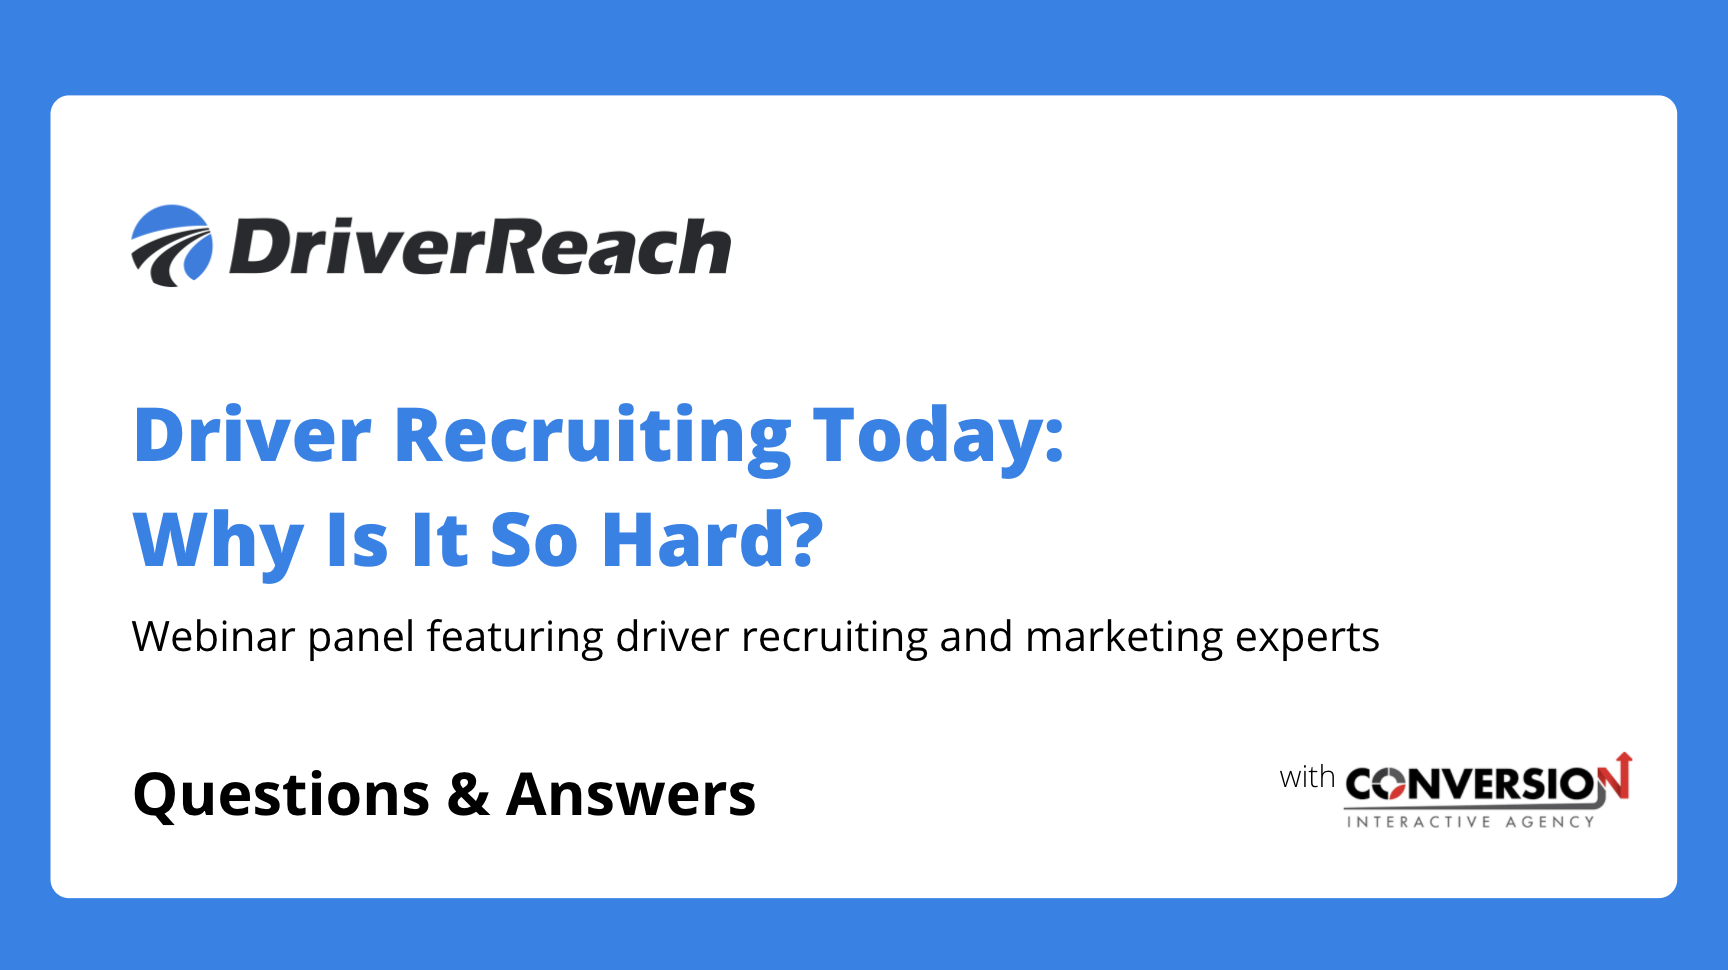 Webinar Q&A Part II: Driver Recruiting Today: Why Is It So Hard? 